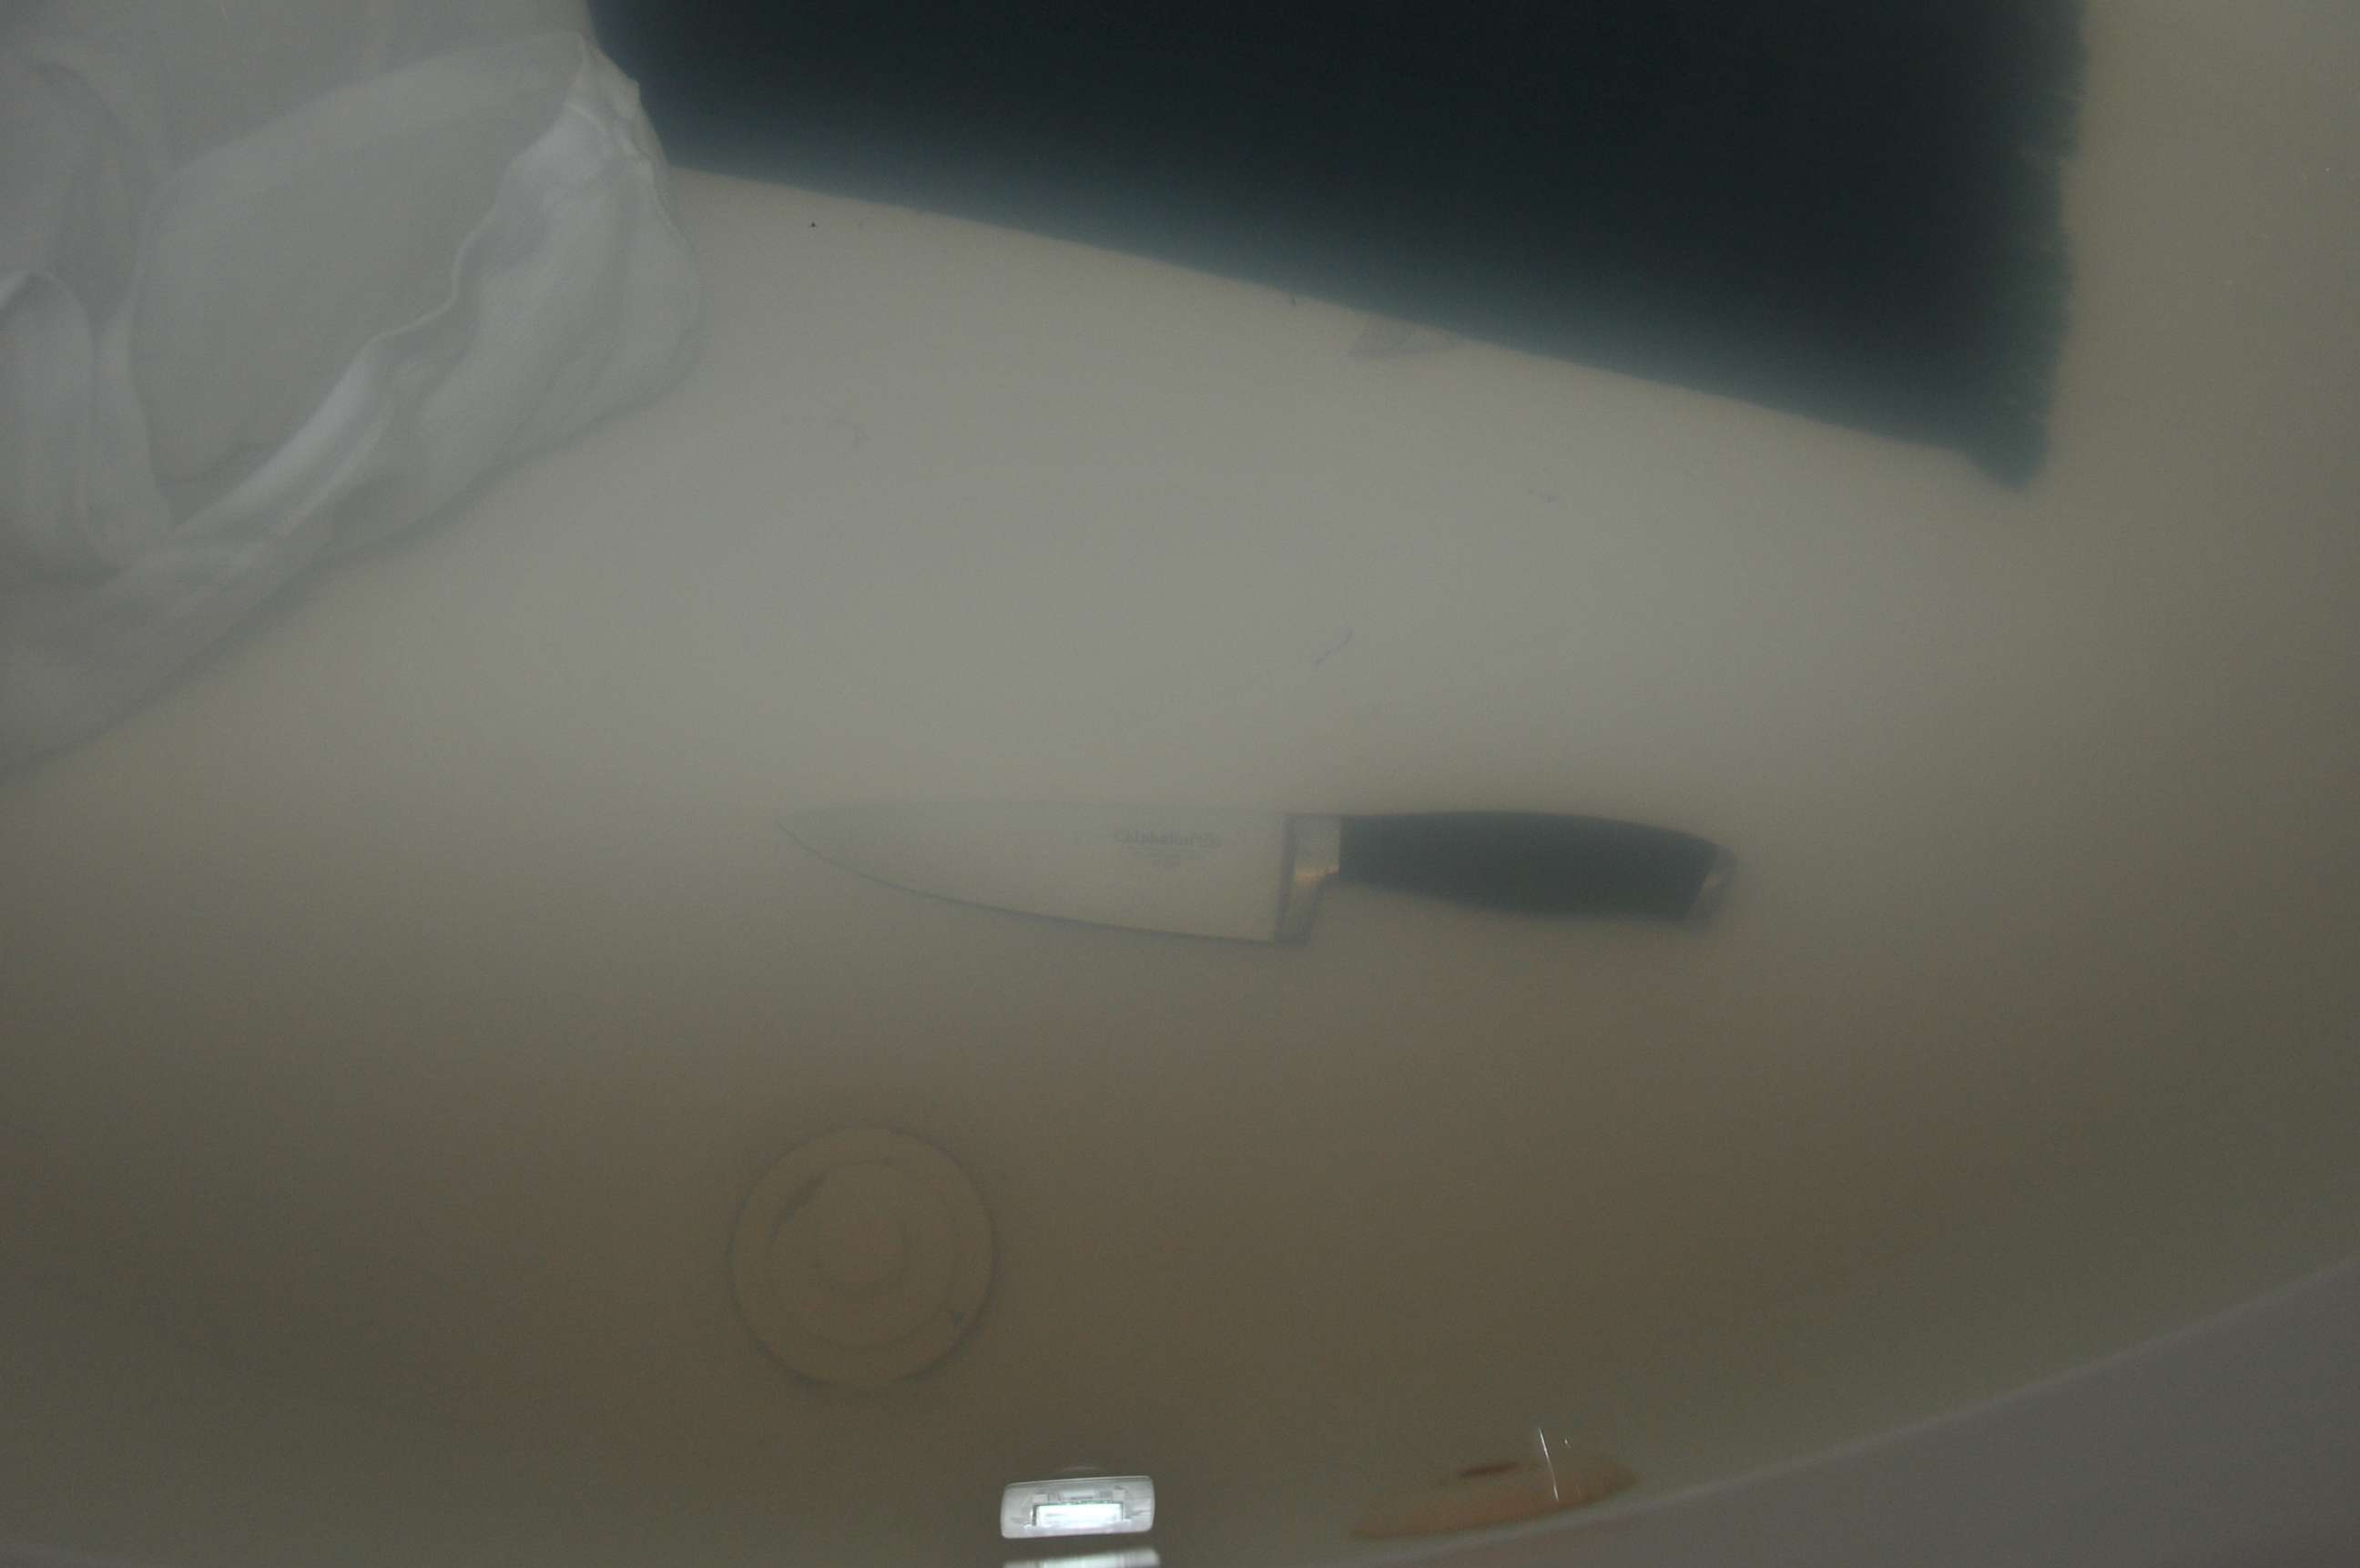 PHOTO: The murder weapon was found in the Melgars' jacuzzi.